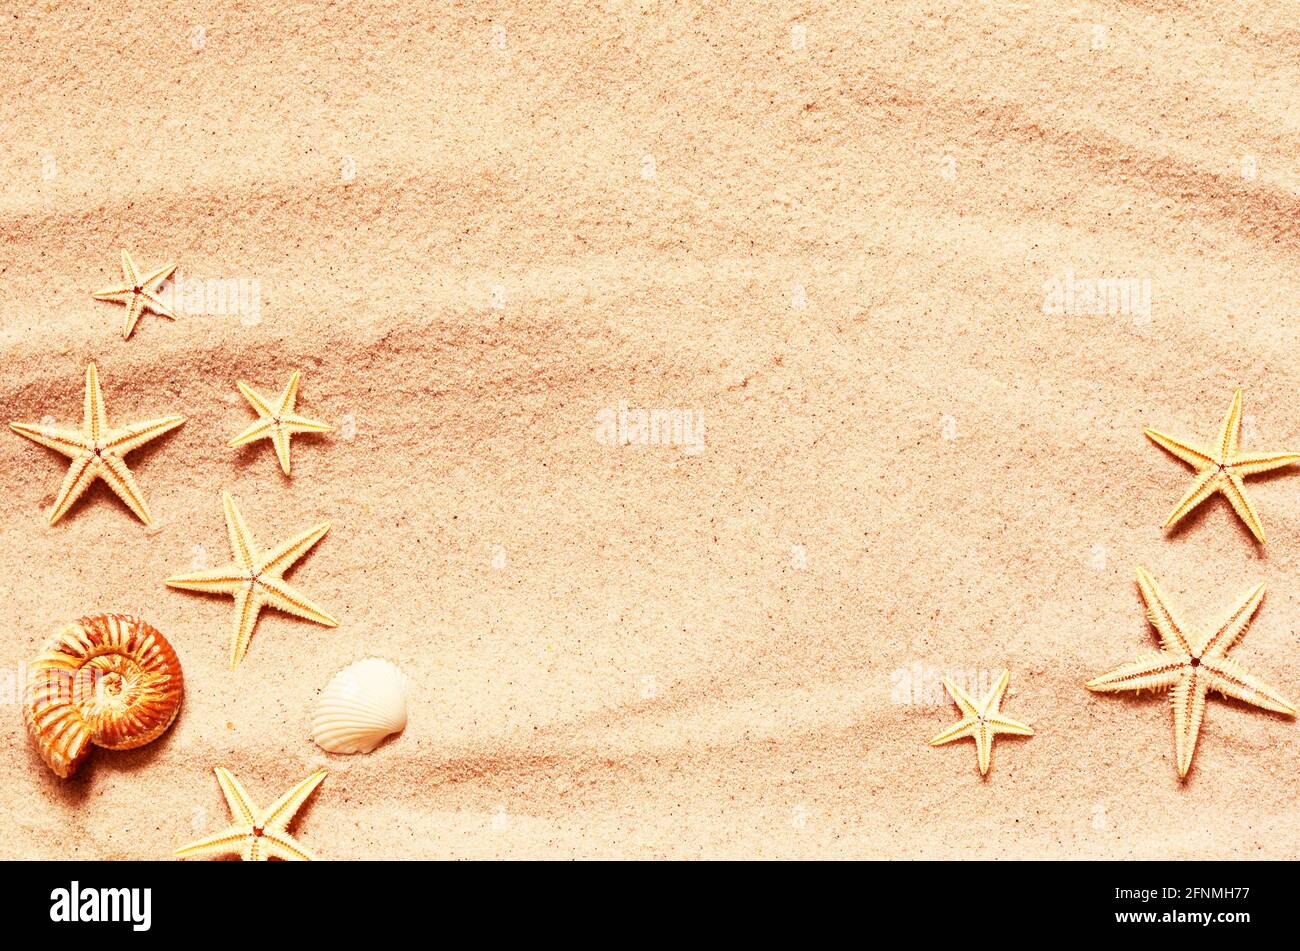 Seashell and starfish pattern on the sandy beach. Summer background. Summer time. Stock Photo